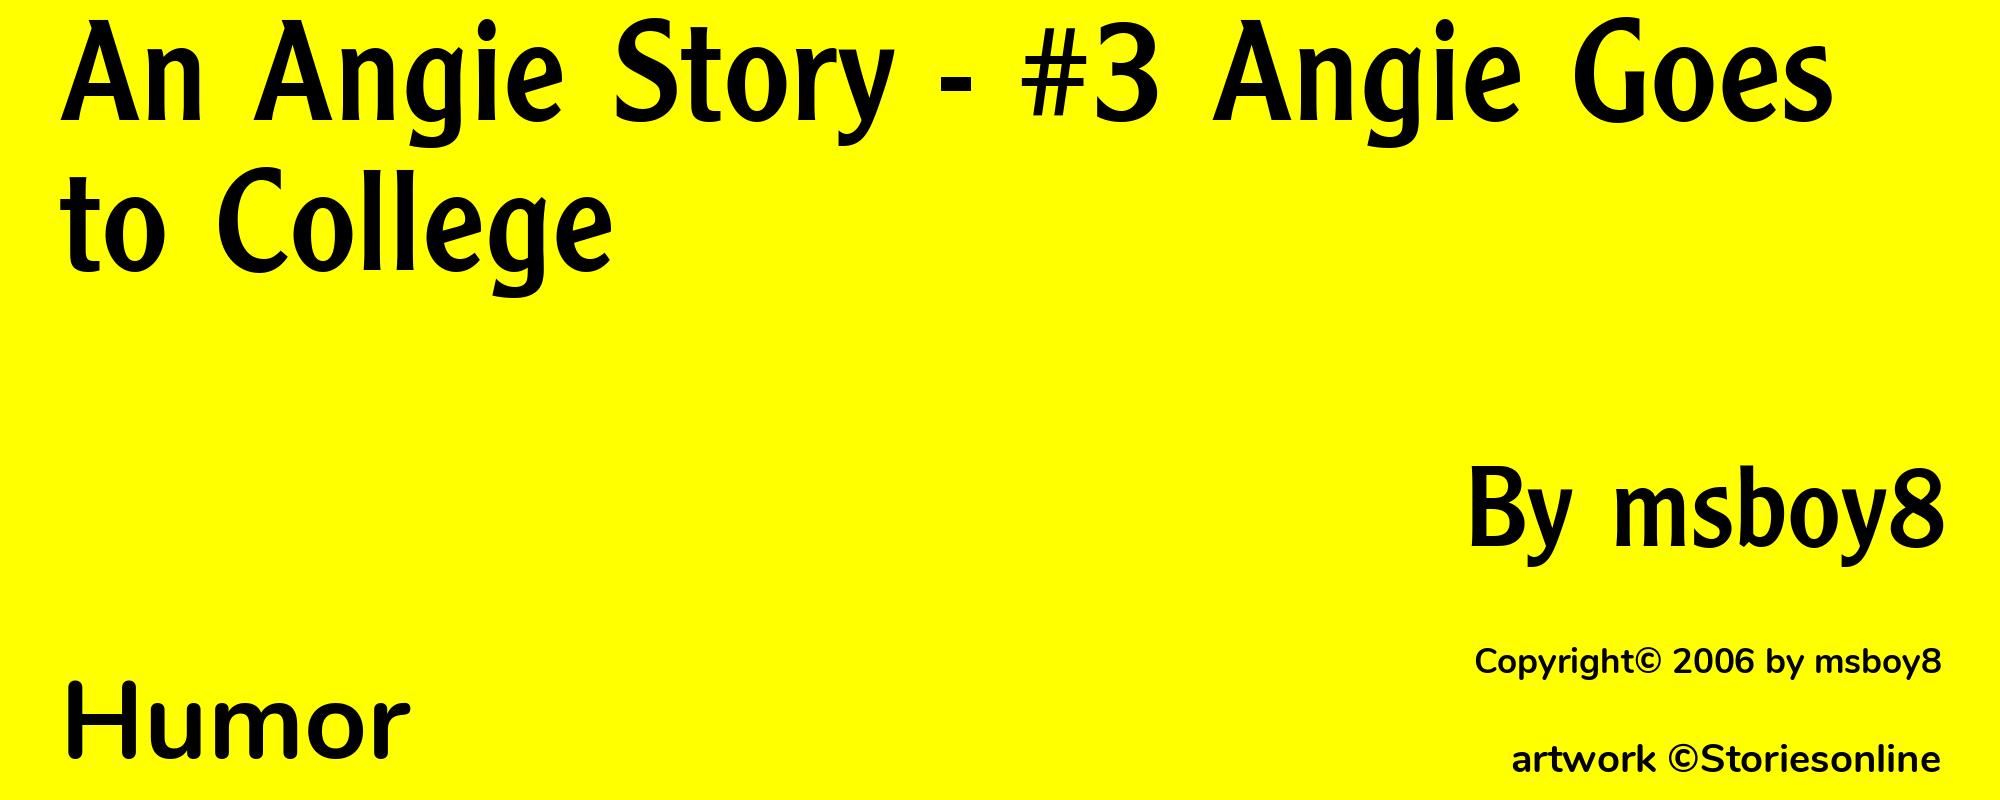 An Angie Story - #3 Angie Goes to College - Cover